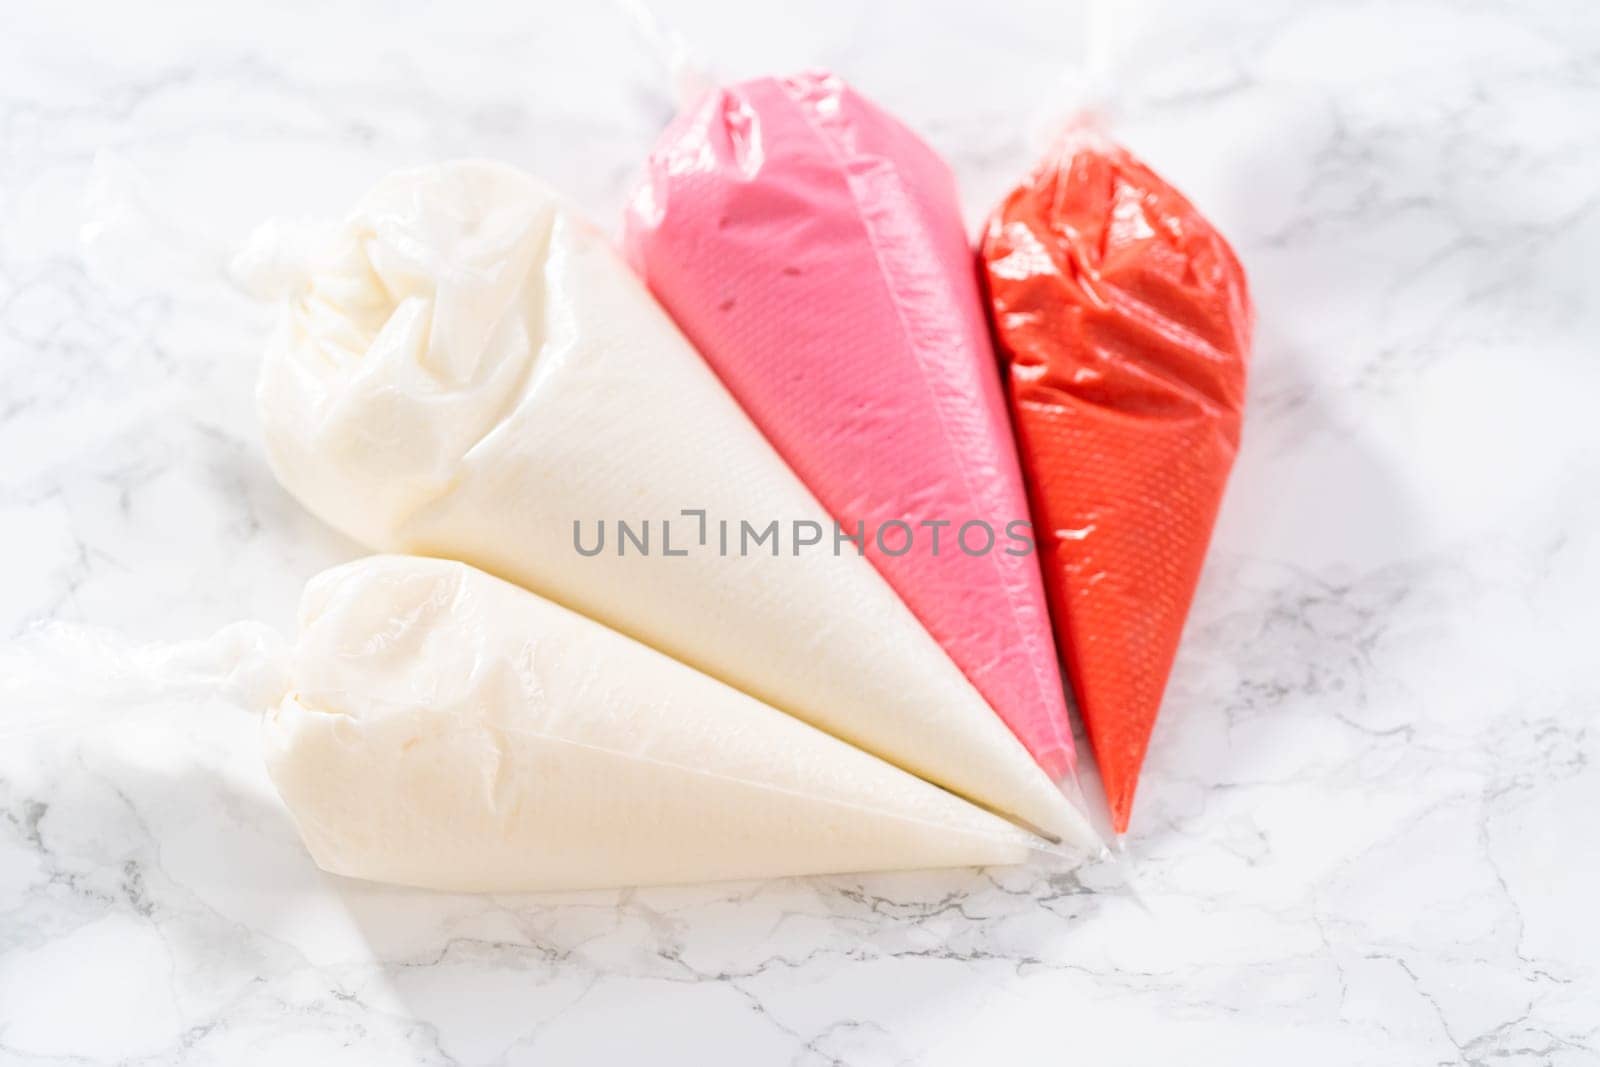 Homemade royal icing for decorating heart-shaped sugar cookies by arinahabich